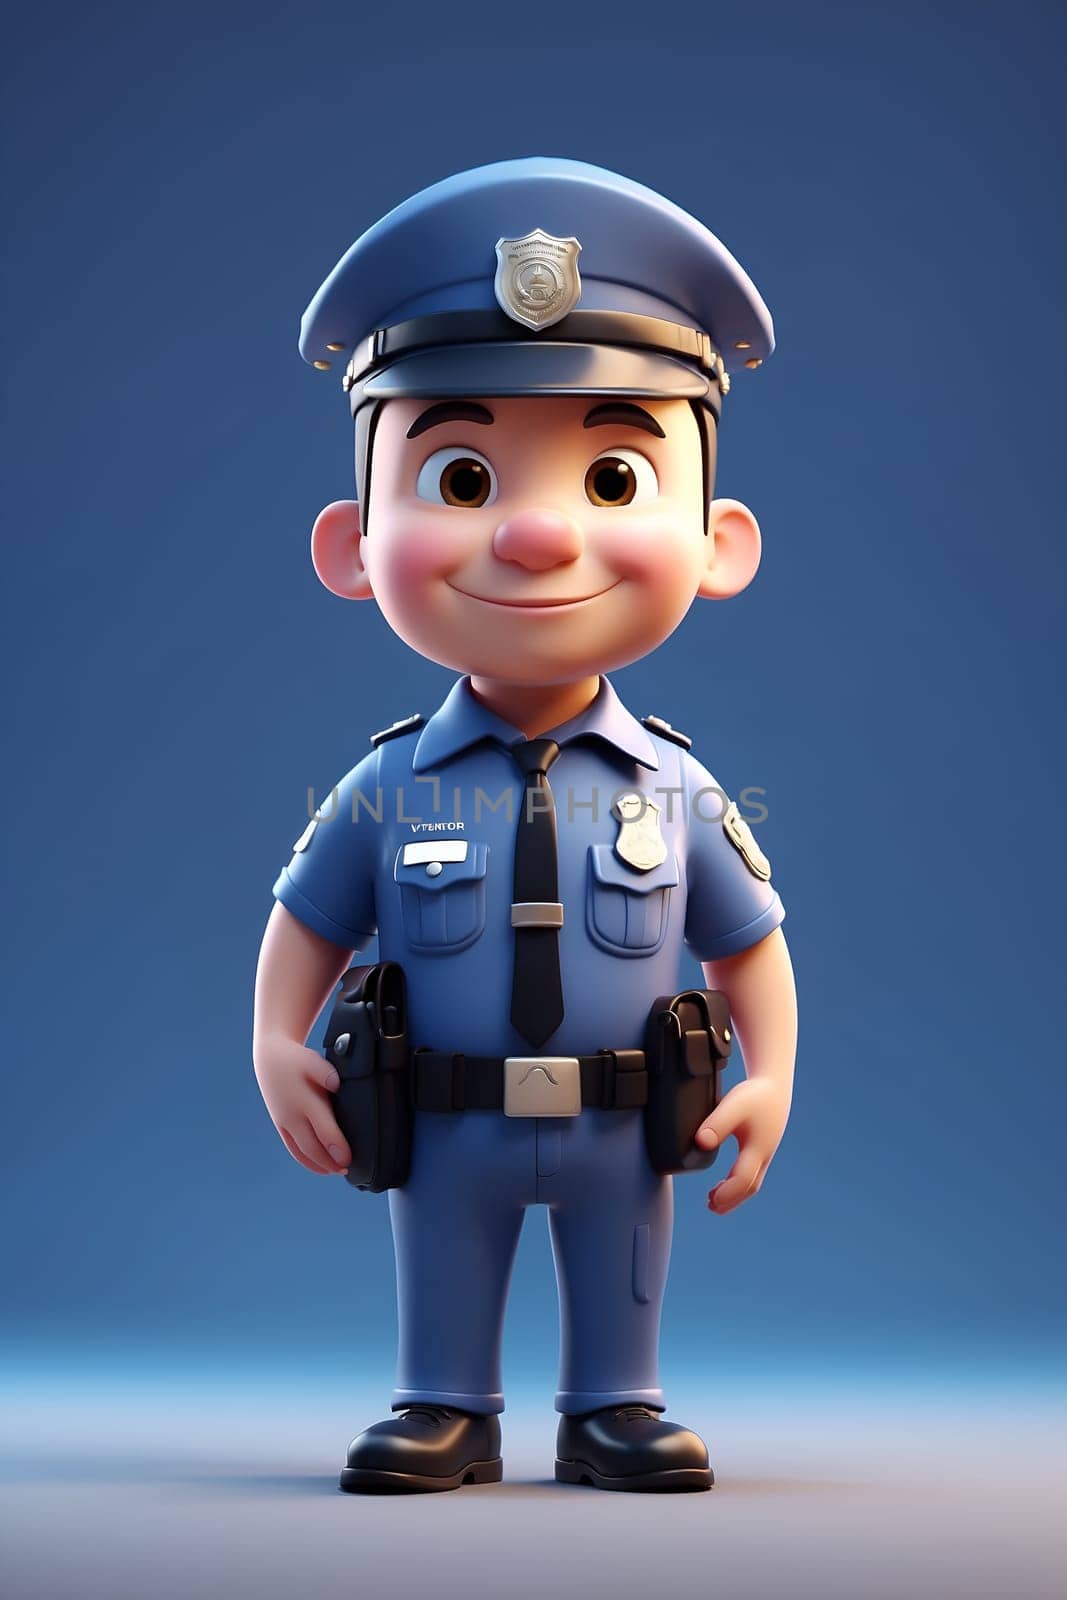 Enjoy this amusing and entertaining picture featuring a cartoon character dressed in a police uniform.